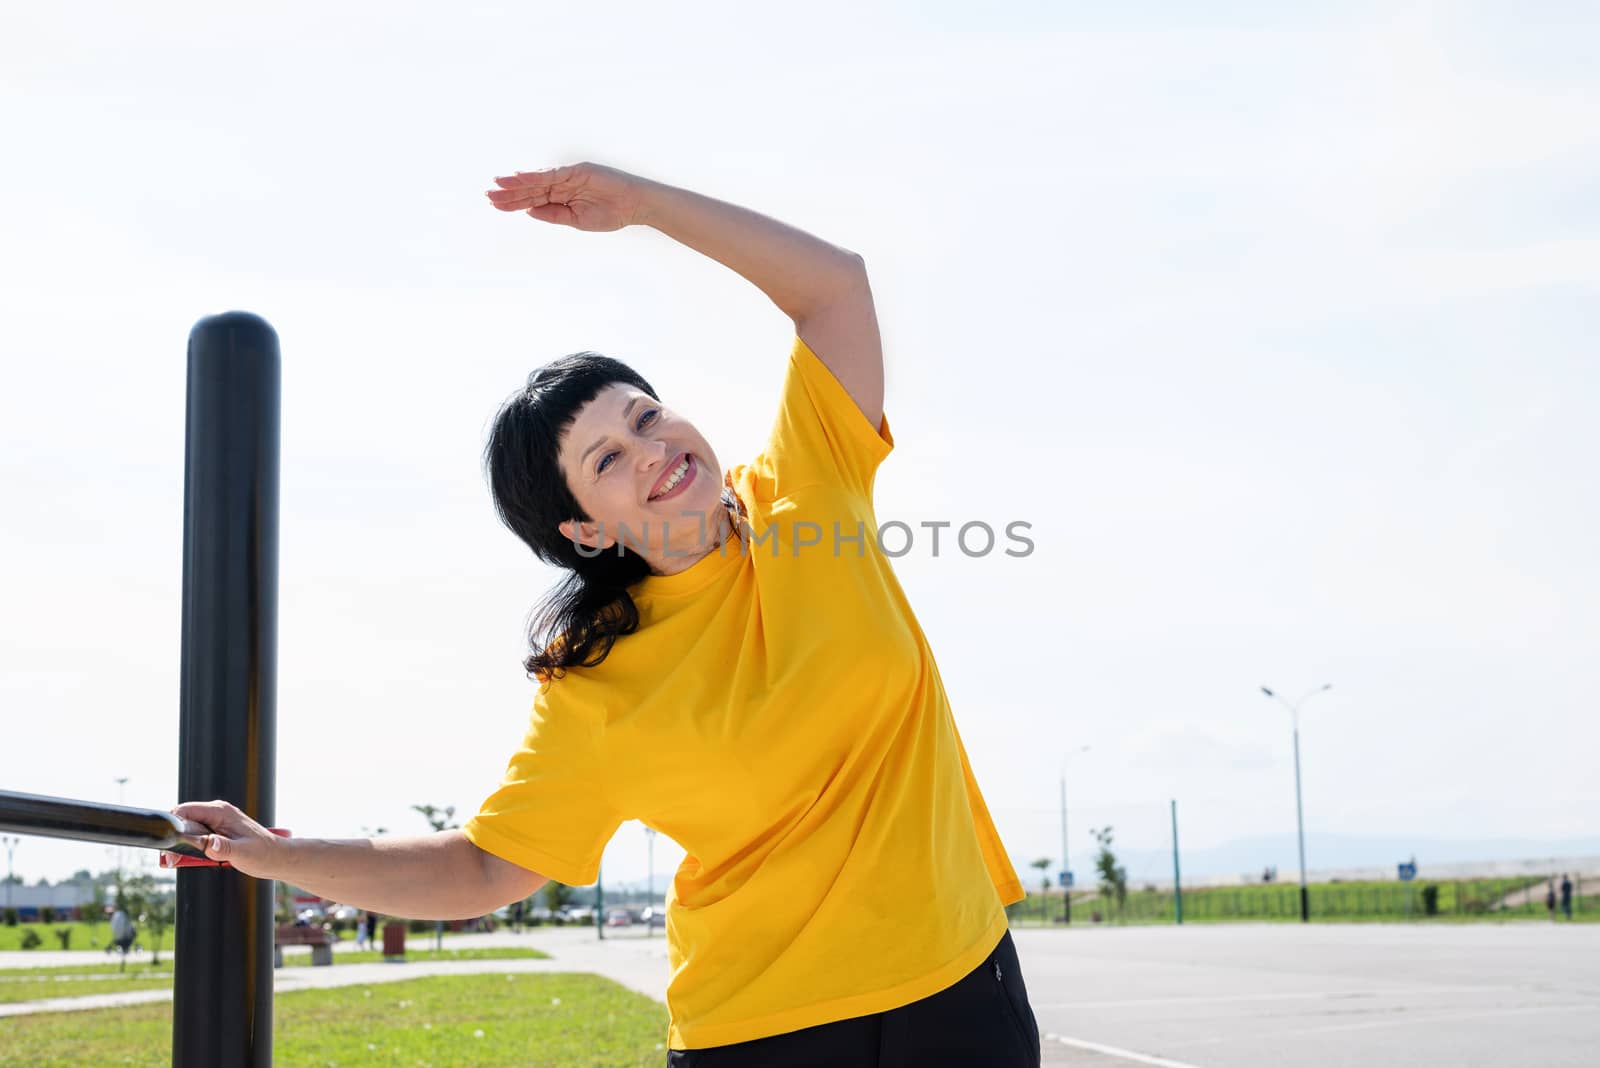 Sport and fitness. Senior sport. Active seniors. Senior woman doing stretching stretching outdoors on the sports ground